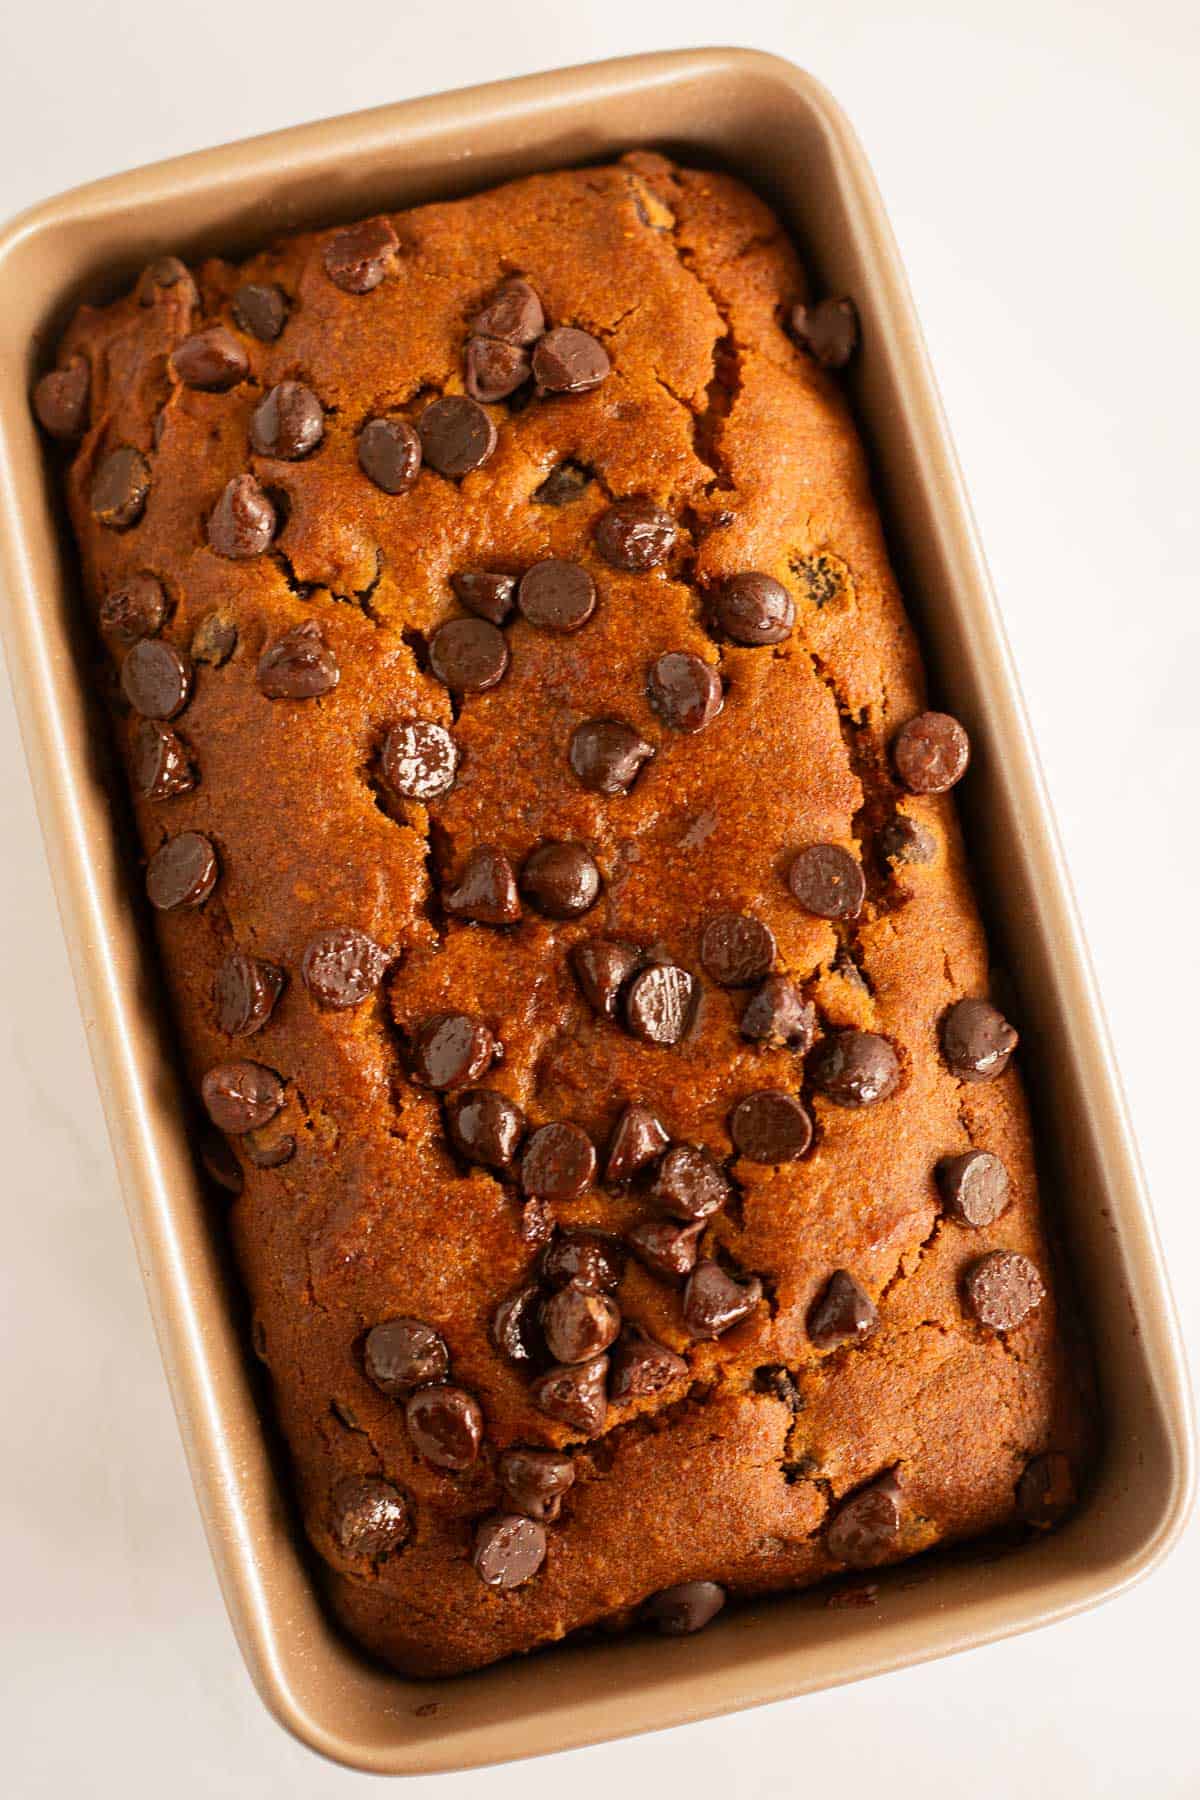 Gluten Free Pumpkin Chocolate Chip Bread baked in a loaf pan.